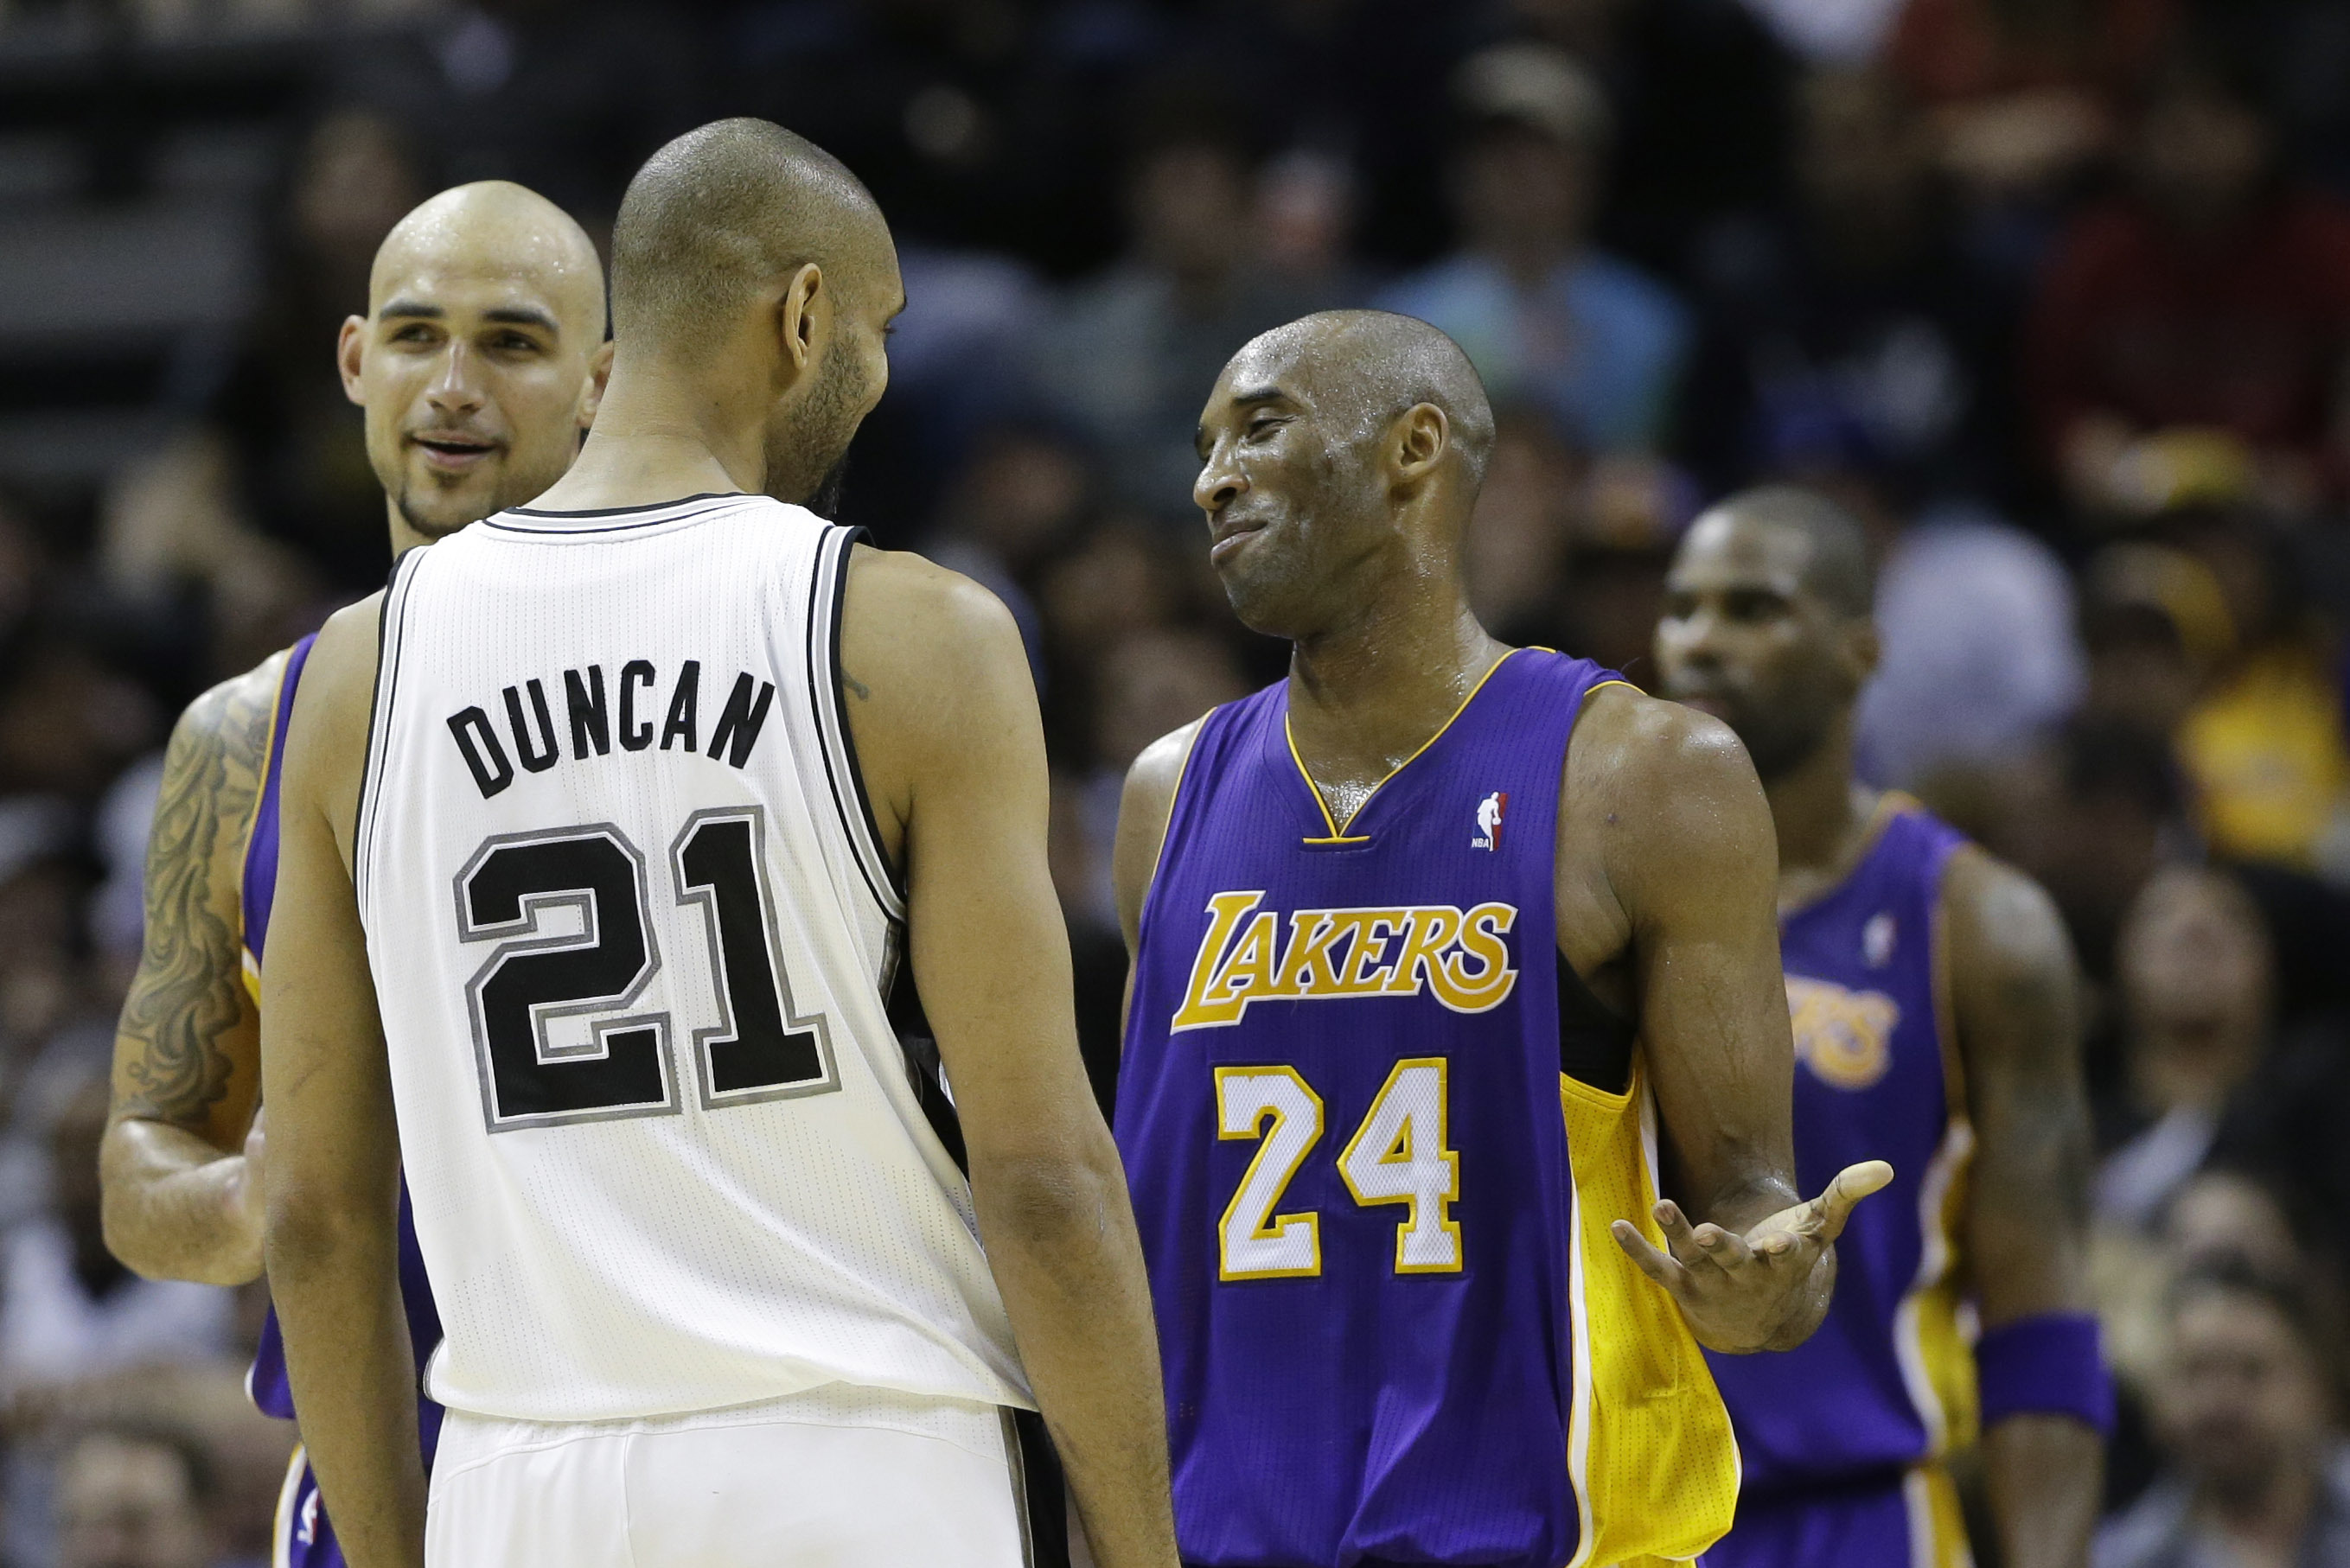 Duncan and Garnett inducted into NBA Hall of Fame